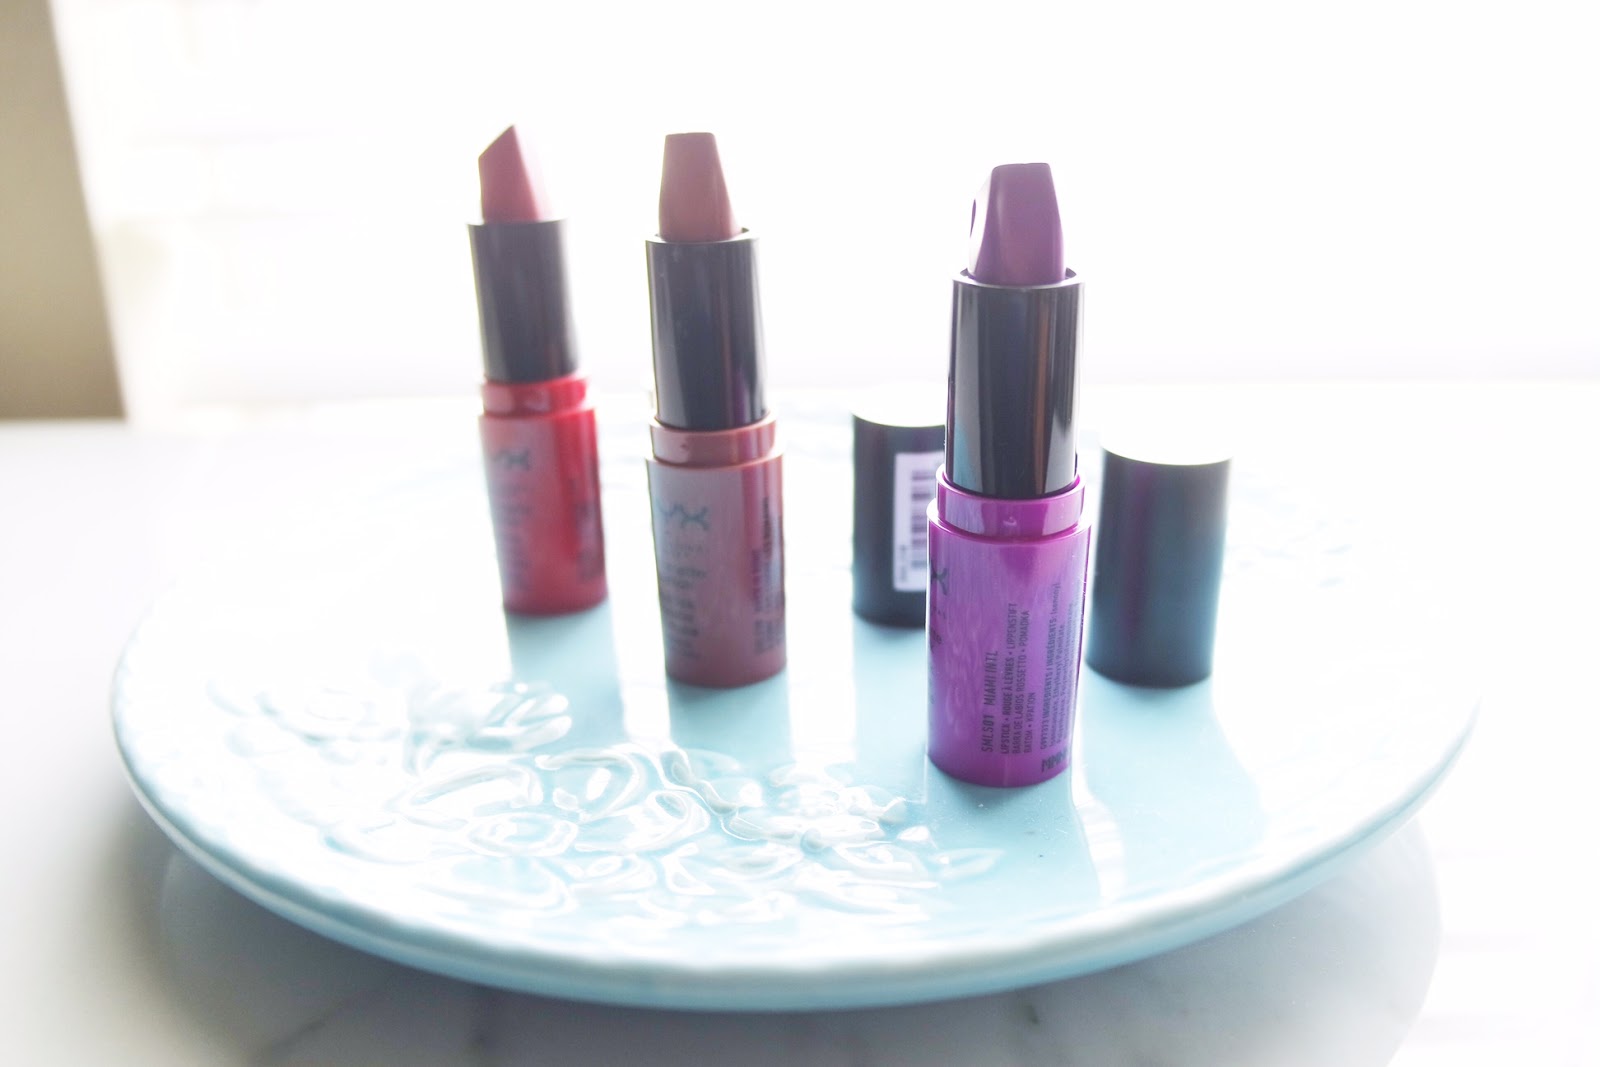 Nyx Soft Matte Lipsticks Review and Swatches